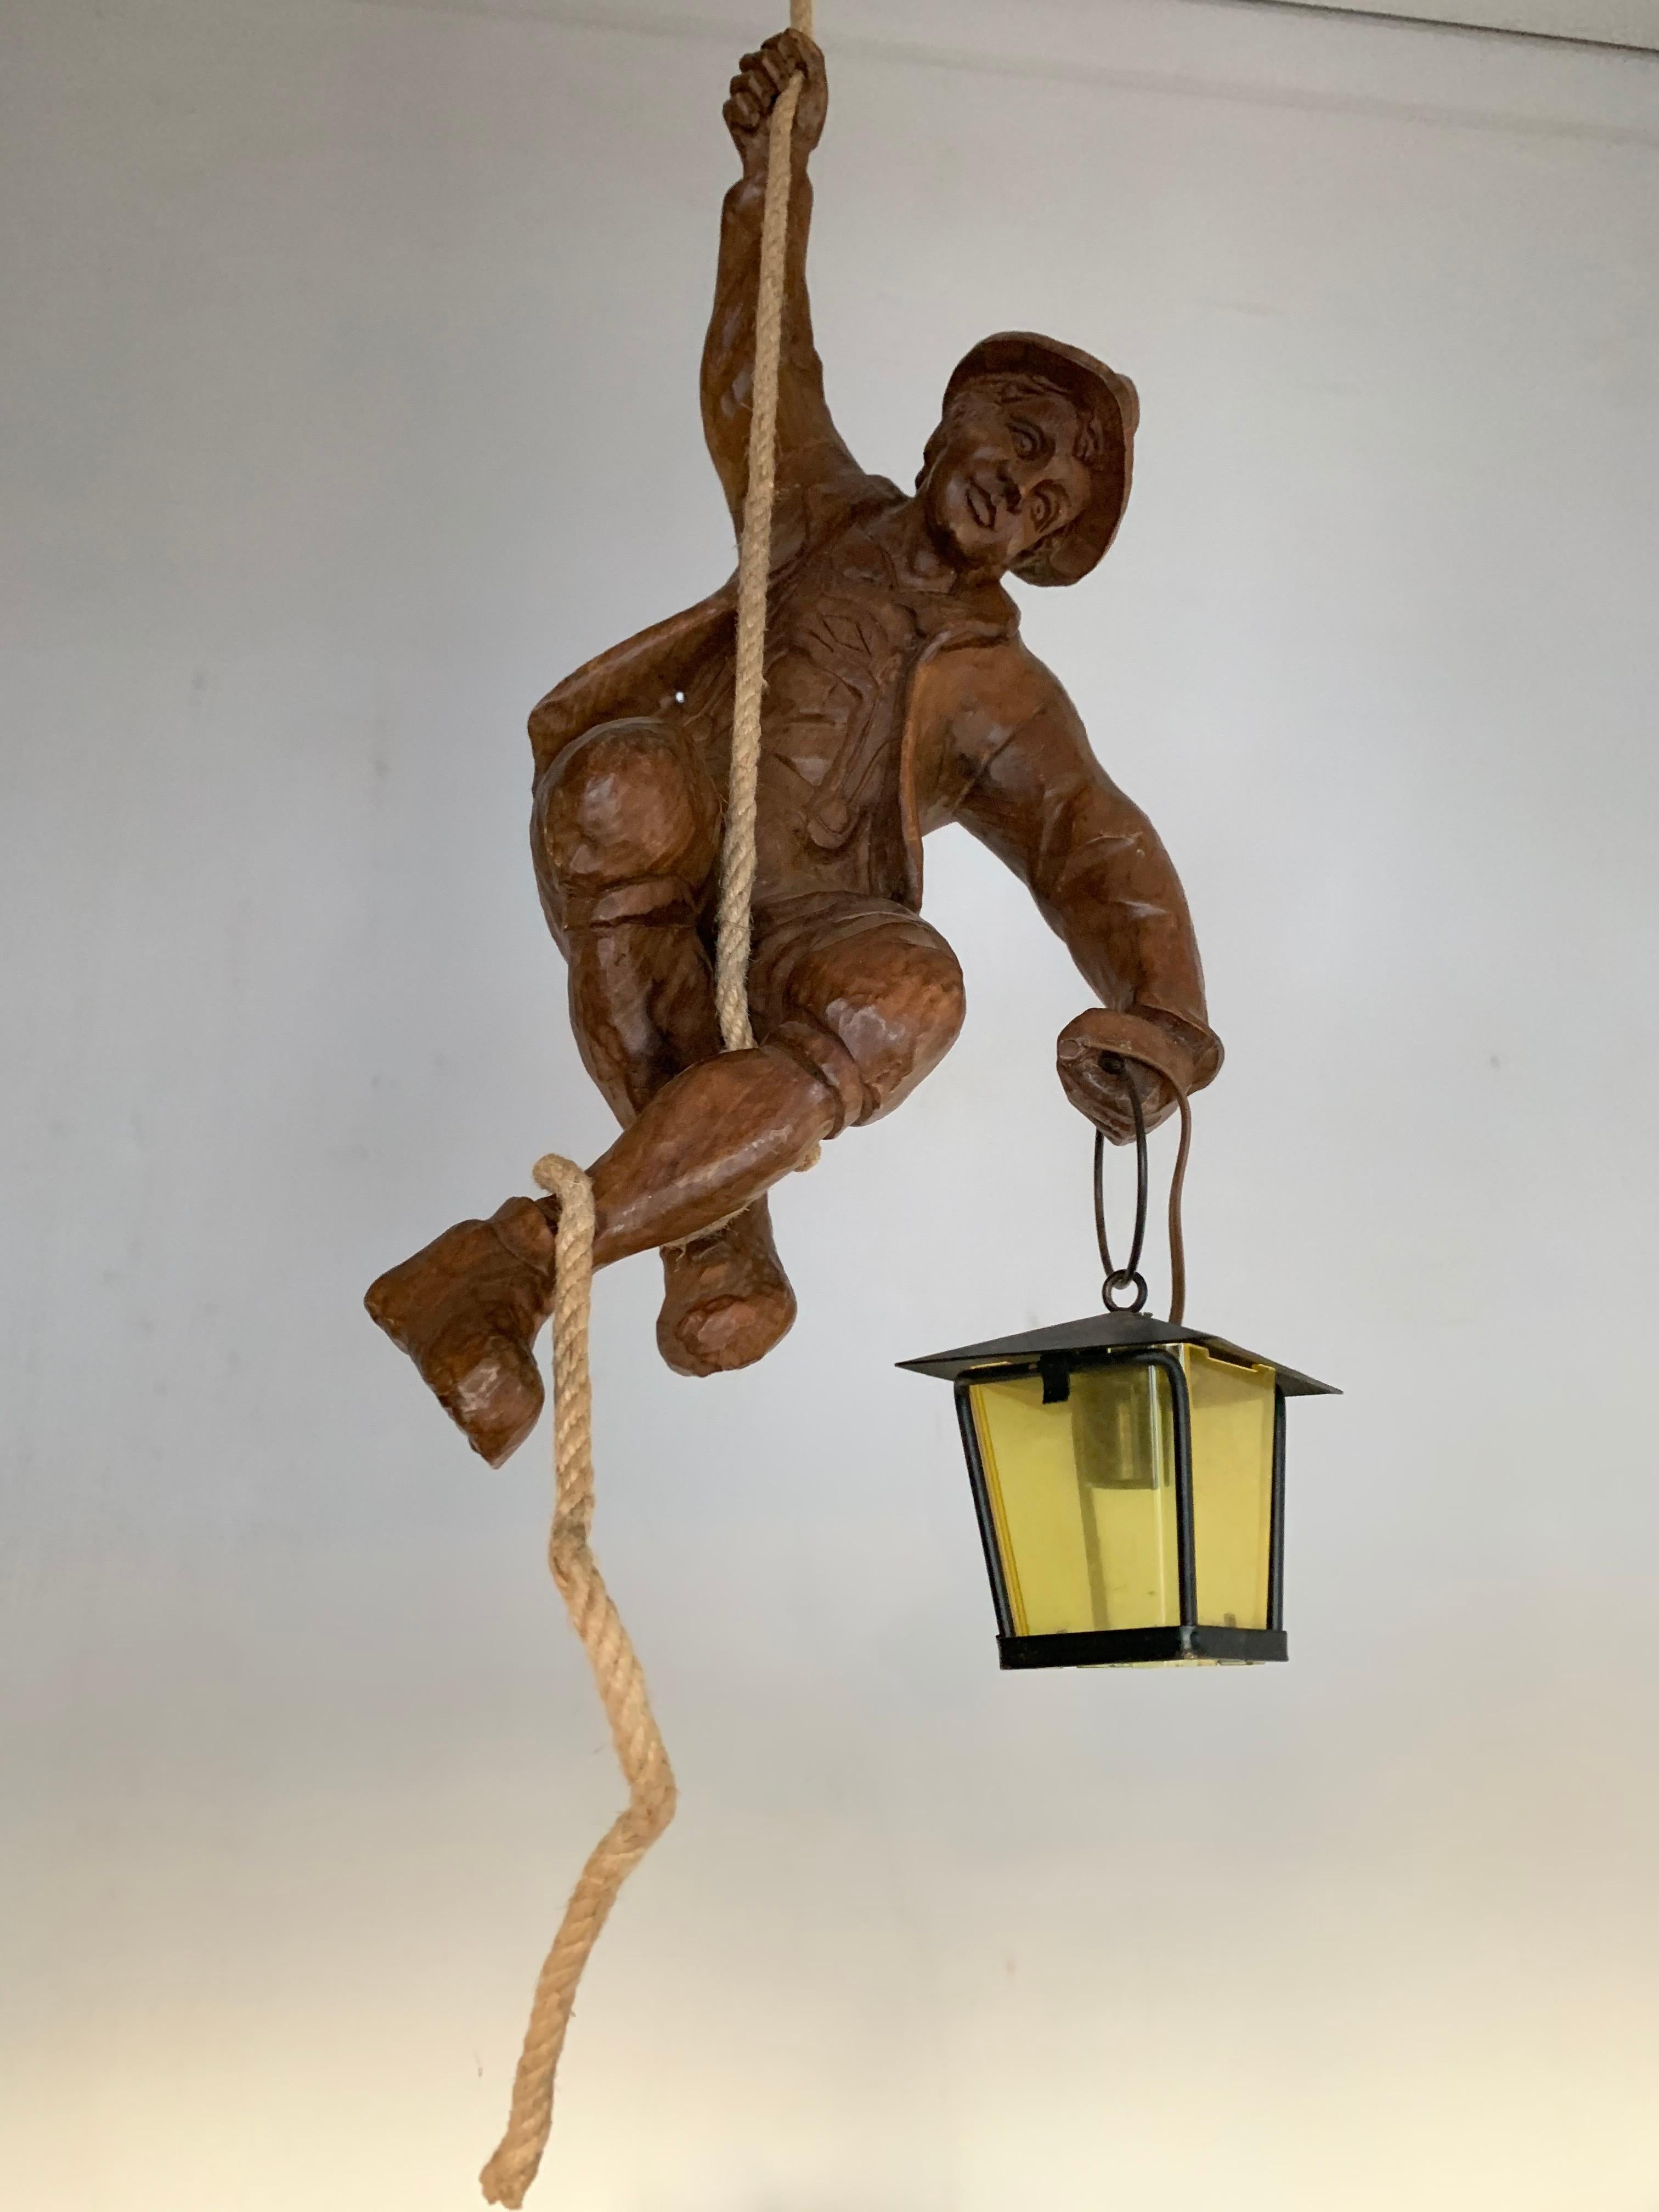 Rare and beautifully crafted light fixture for Black Forest and mountaineering enthousiasts.

This beautifully executed and sculptural light fixture will look great at home, but it can also create the perfect atmosphere in a lodge, a mancave, a